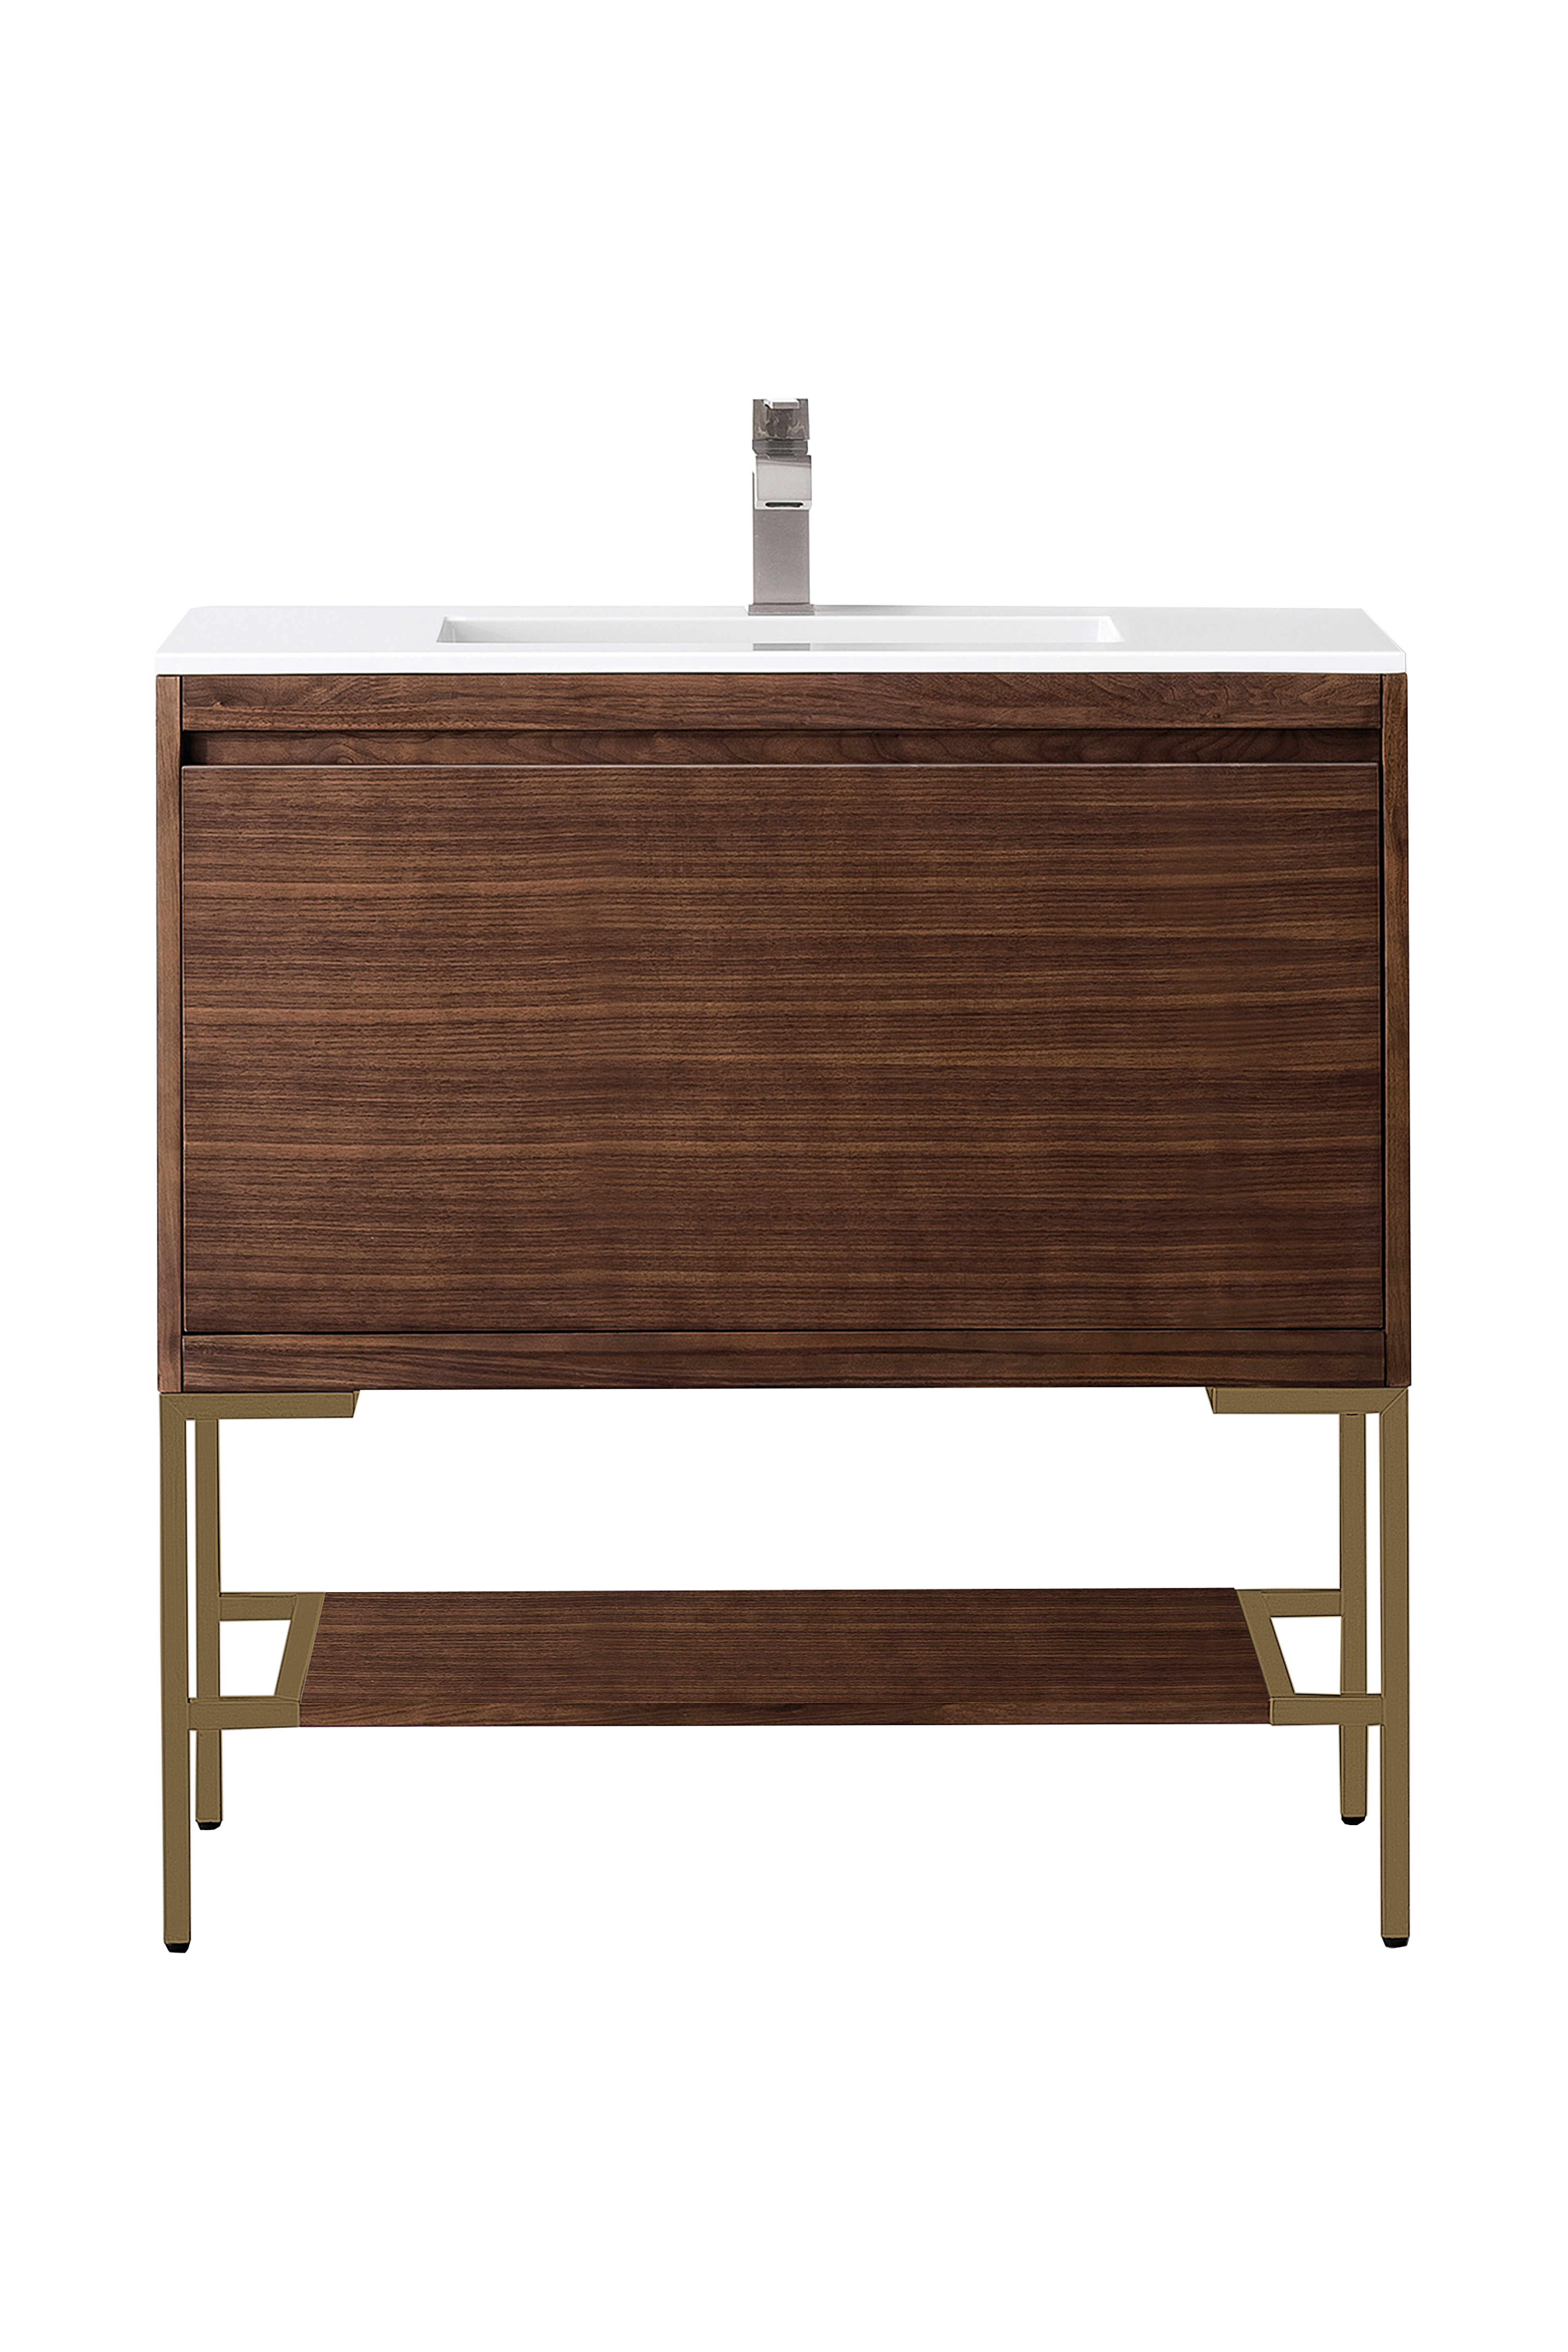 James Martin 801V35.4WLTRGDGW Milan 35.4" Single Vanity Cabinet, Mid Century Walnut, Radiant Gold w/Glossy White Composite Top